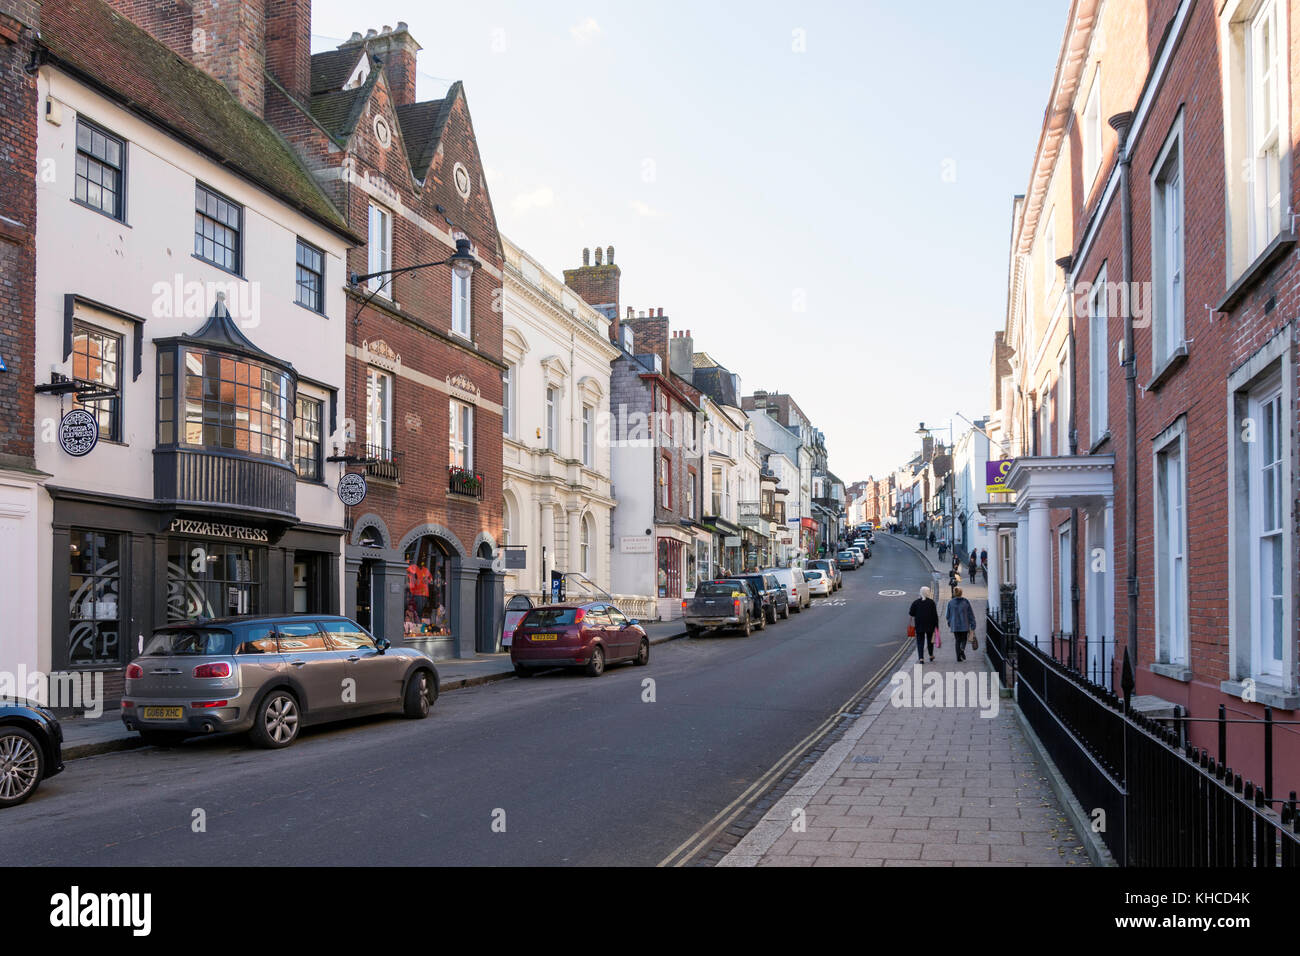 High Street, Lewes Lewes, East Sussex, Angleterre, Royaume-Uni Banque D'Images